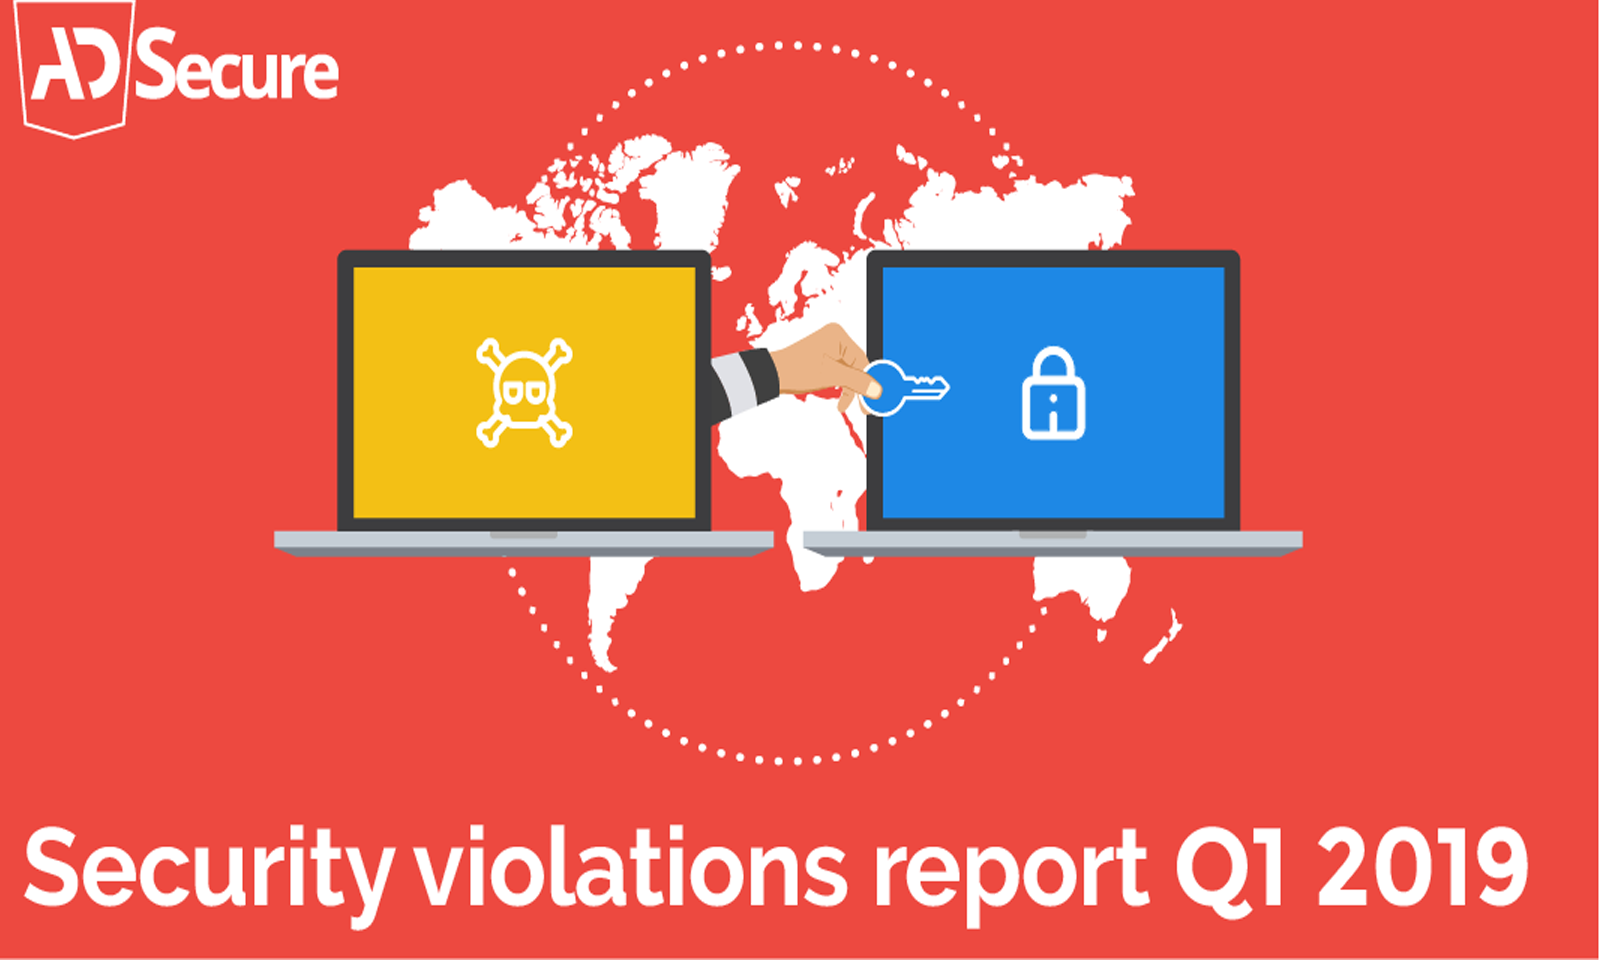 AdSecure Releases First Security Violations Report for Q1 2019